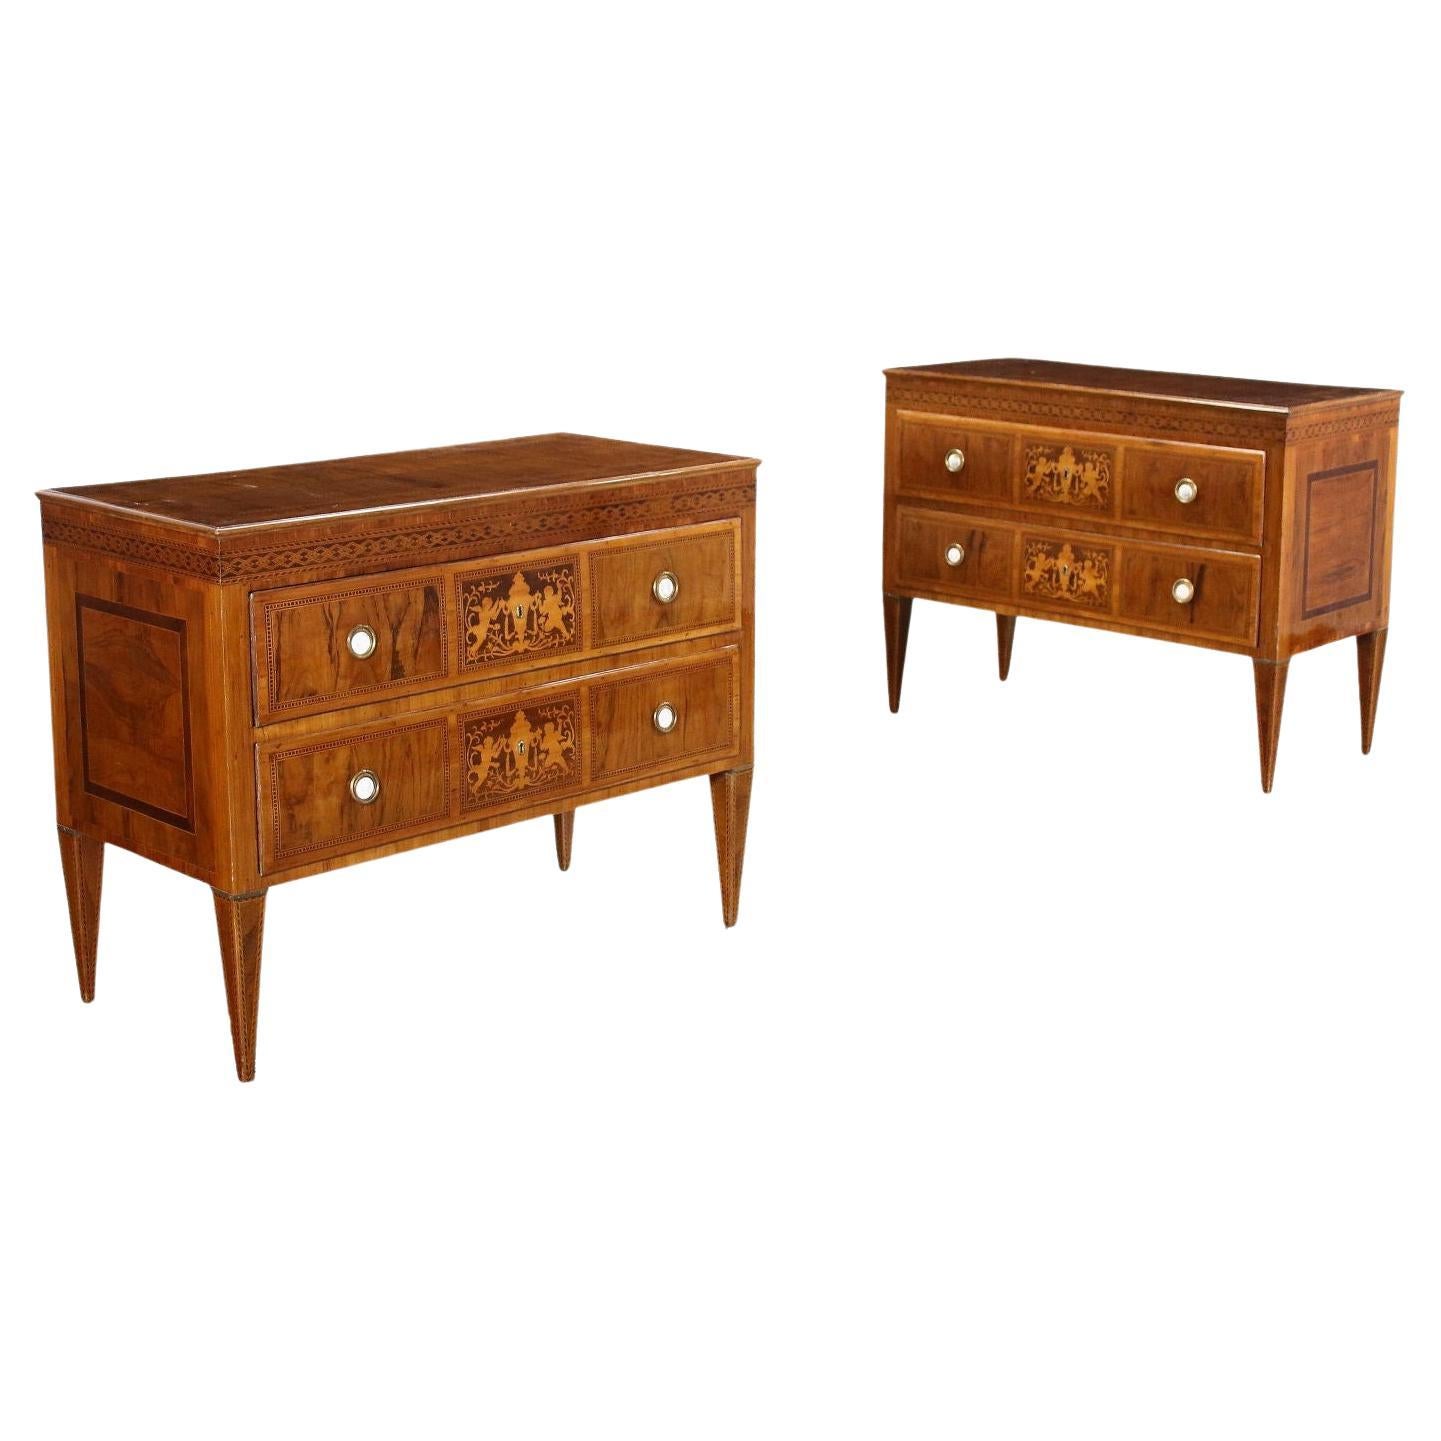 Pair of Tuscan Neoclassical Chest of Drawers, Tuscany Late 18th Century